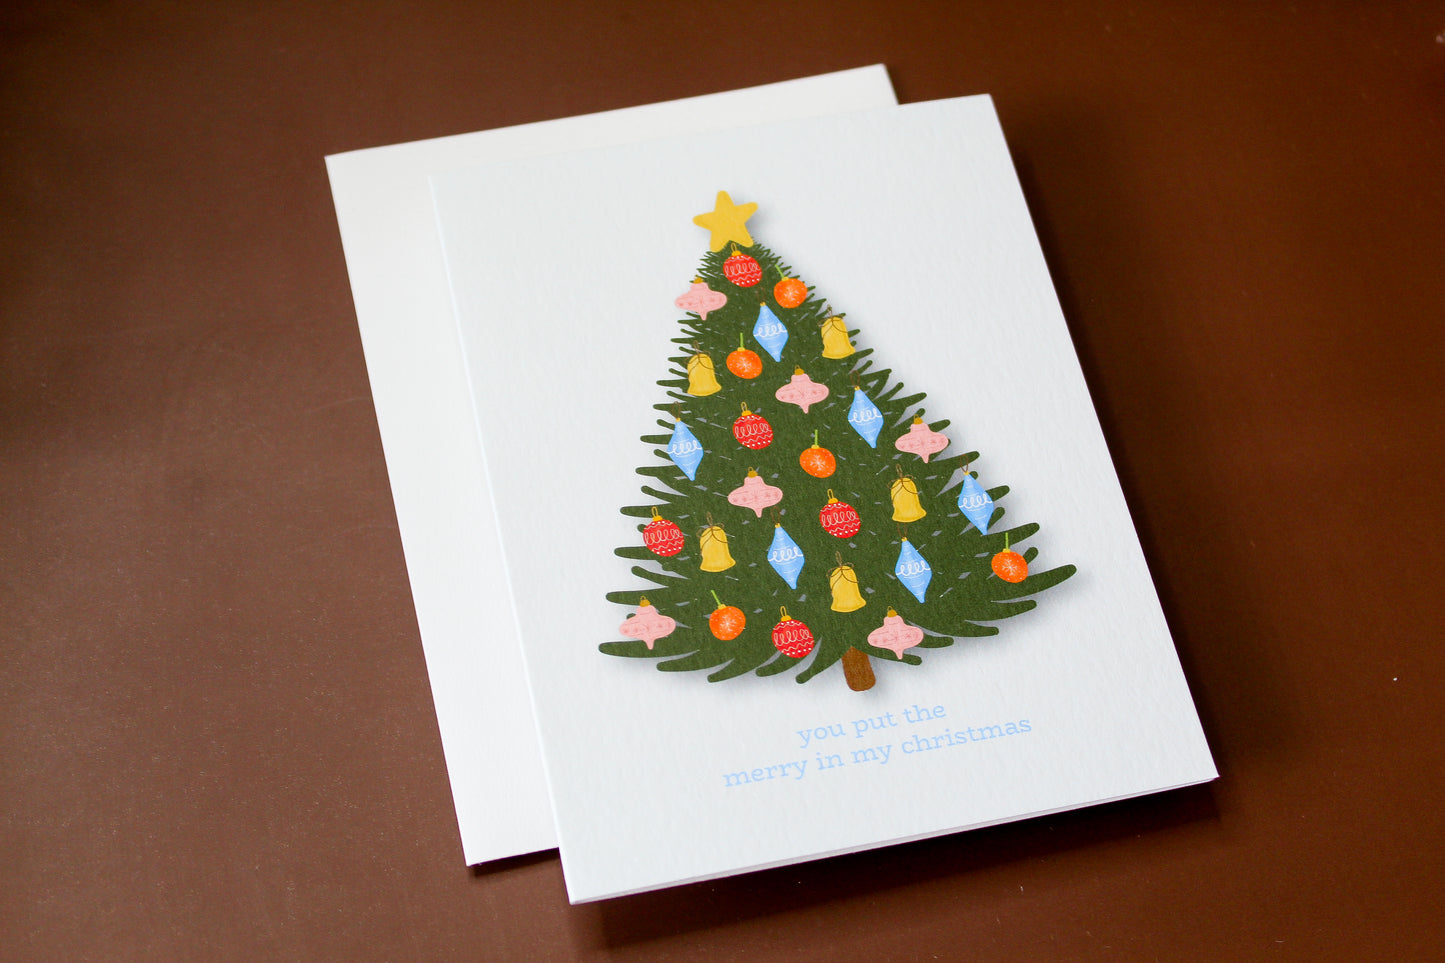 You Put The Merry in my Christmas Greeting Card